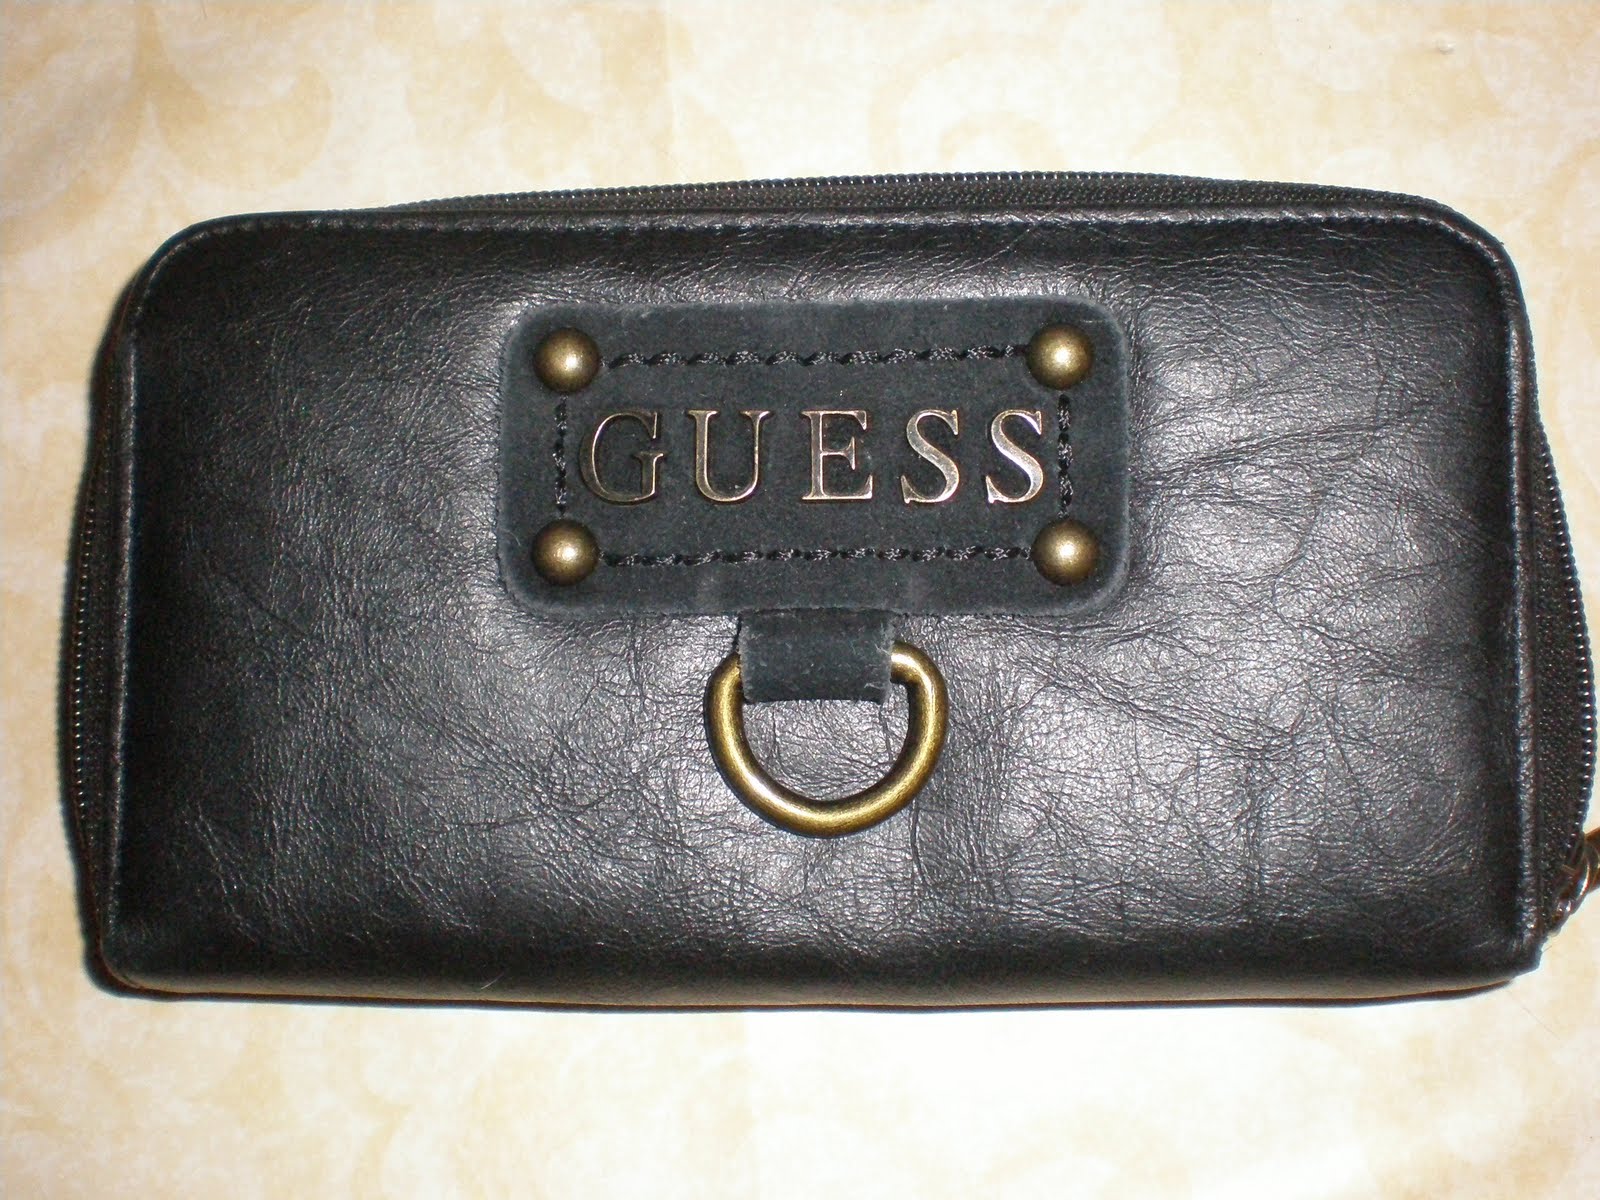 Beauty, fashion, my life.....: My new guess wallet..!!